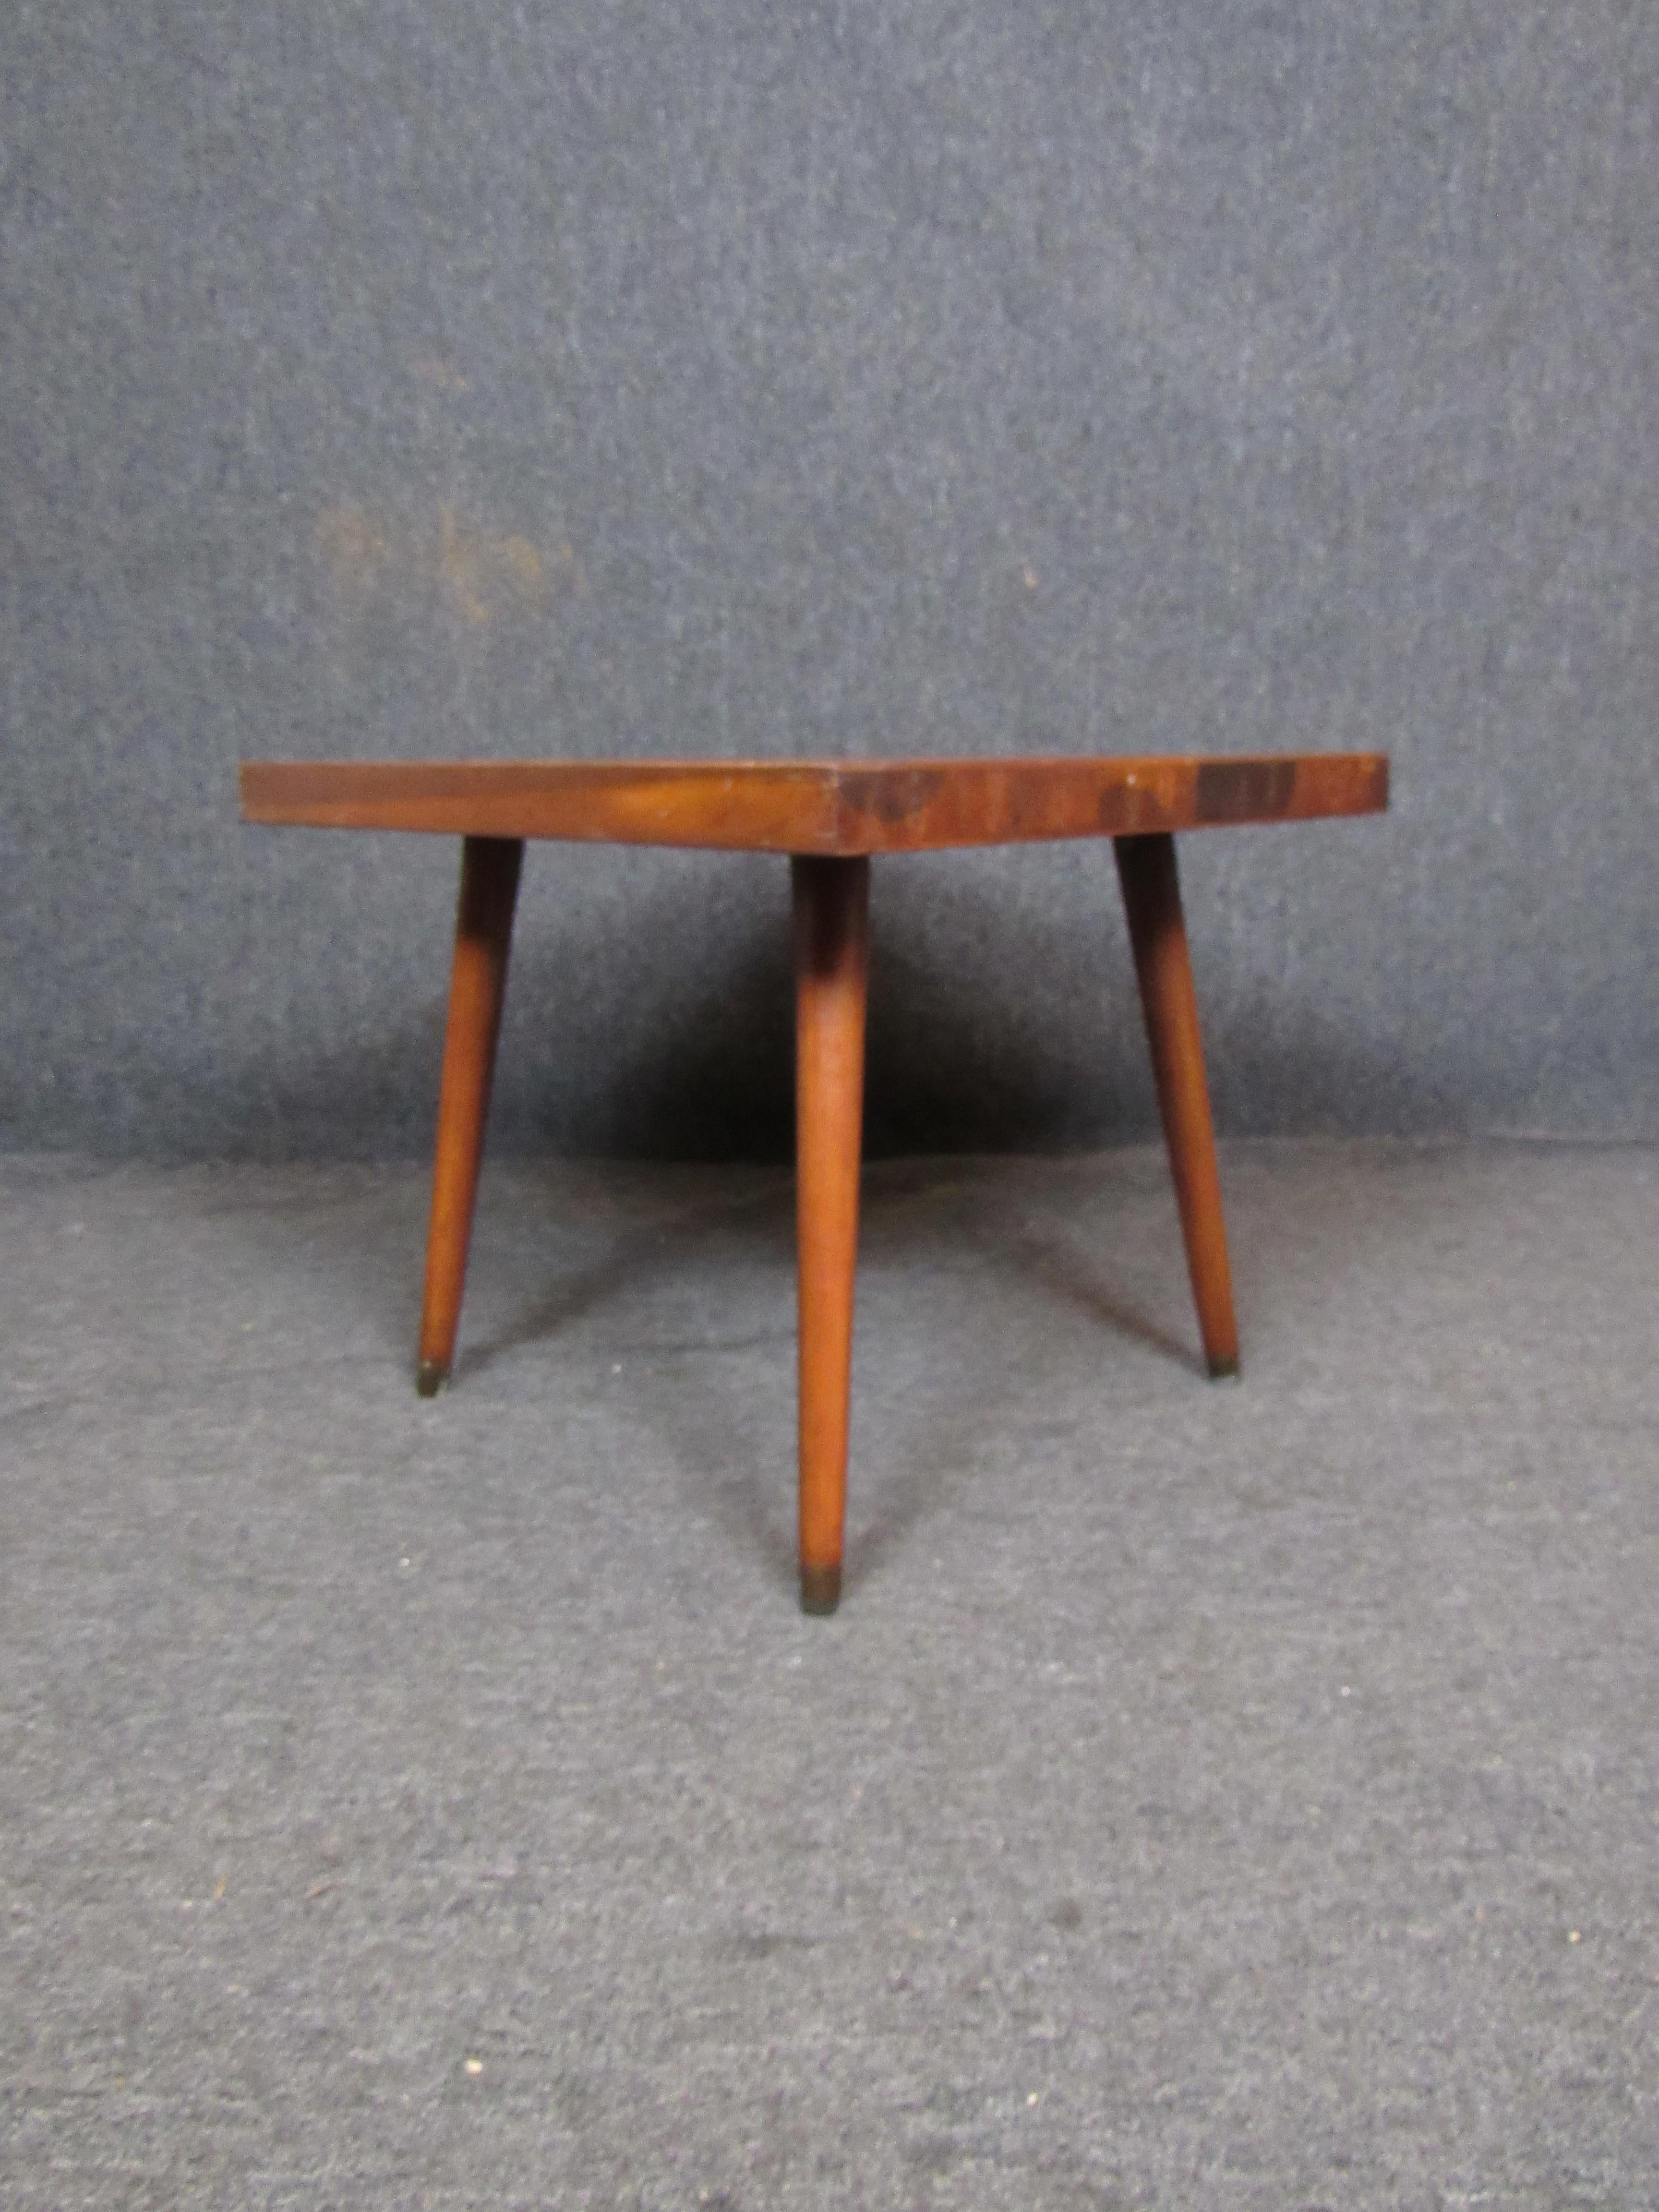 Terrific vintage Mid-Century Morden table in a beautiful golden brown maple. A simple, yet gorgeous design borrows from the styles both of Paul McCobb and George Nakashima for a piece that is both unique, yet classic. A thick slab tabletop paired